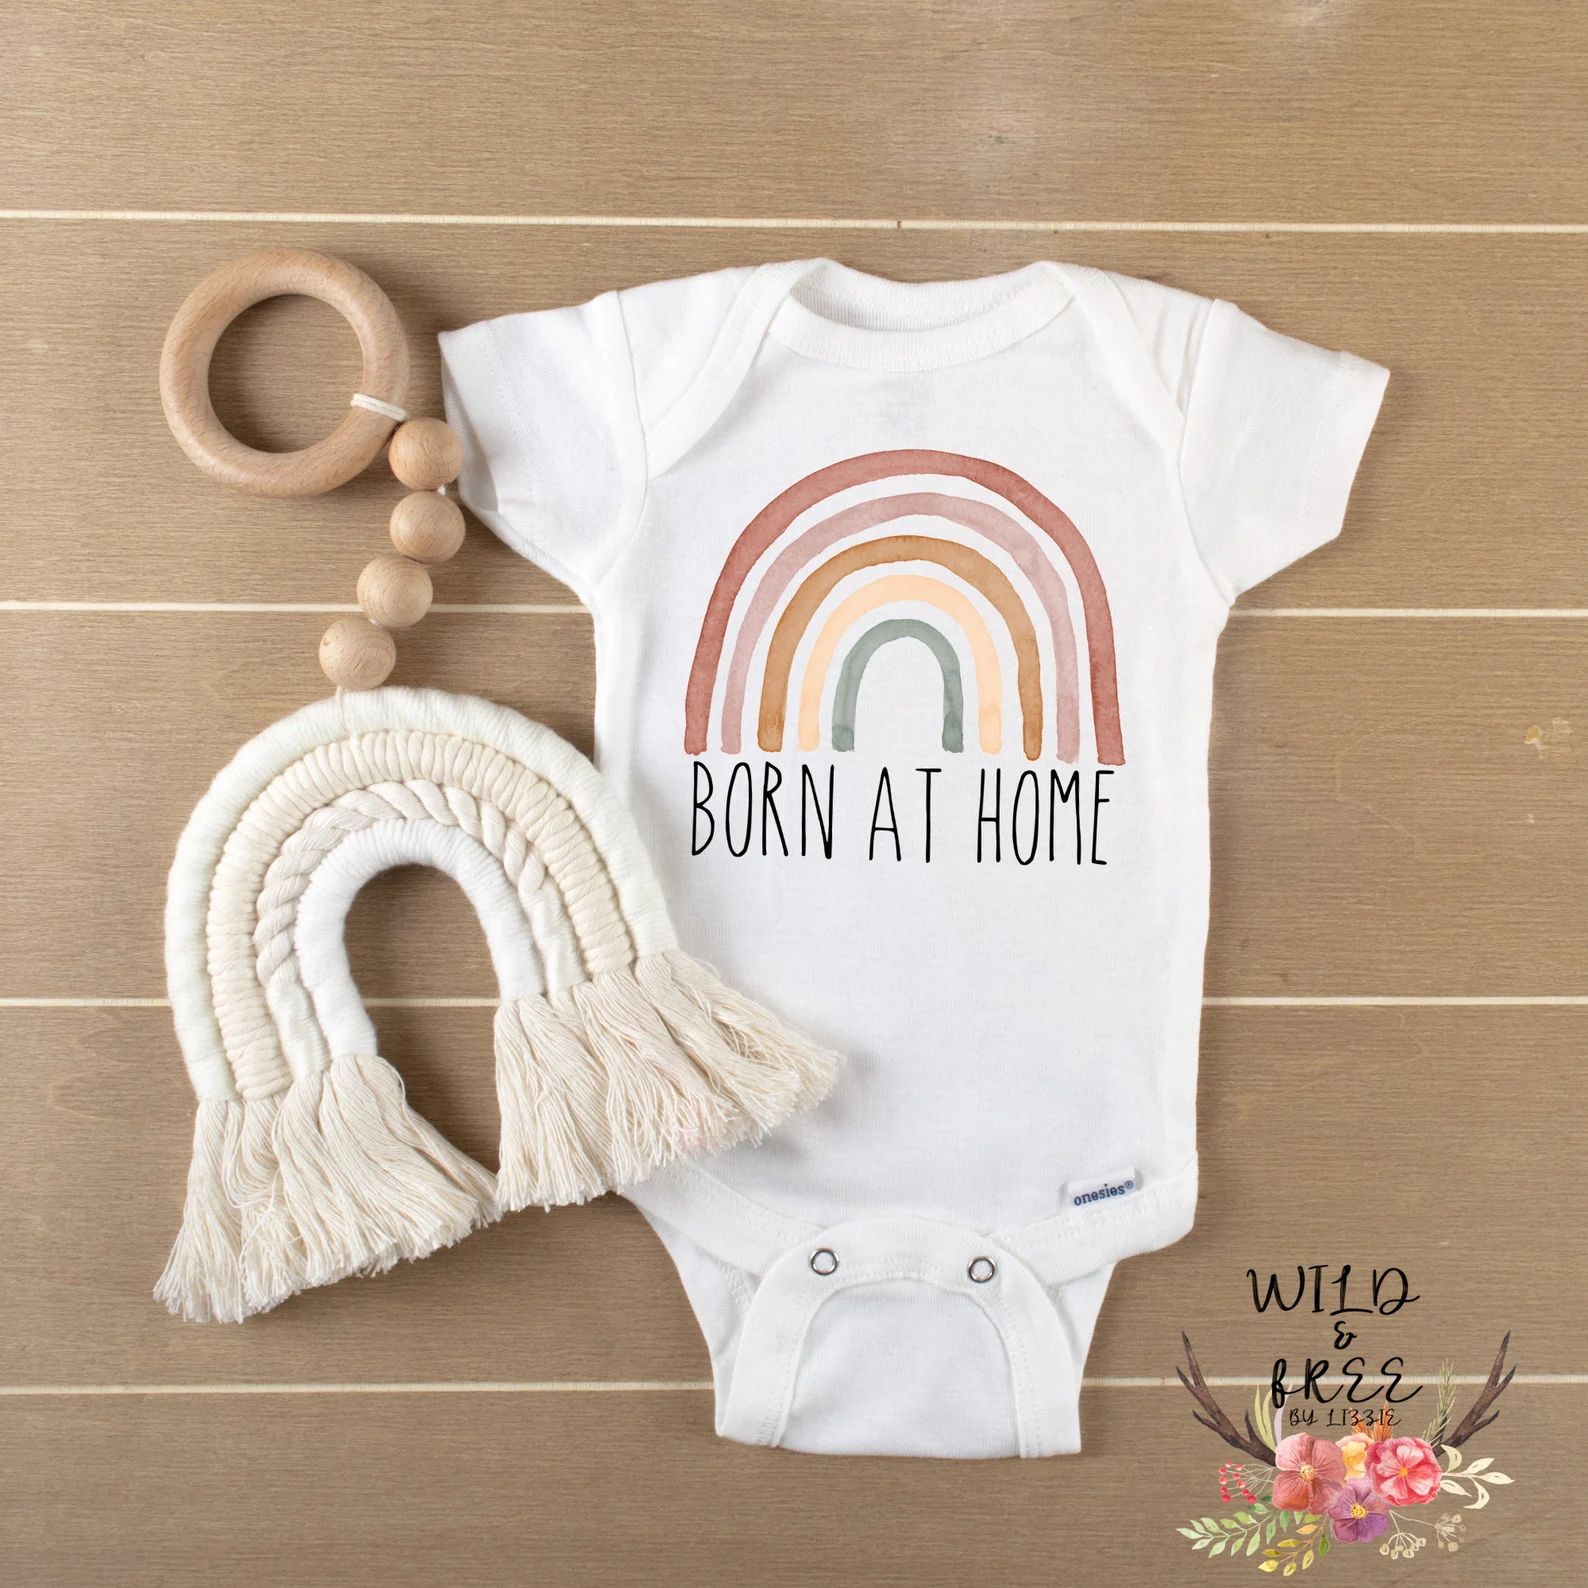 Born at home onesie with a rainbow on the design.